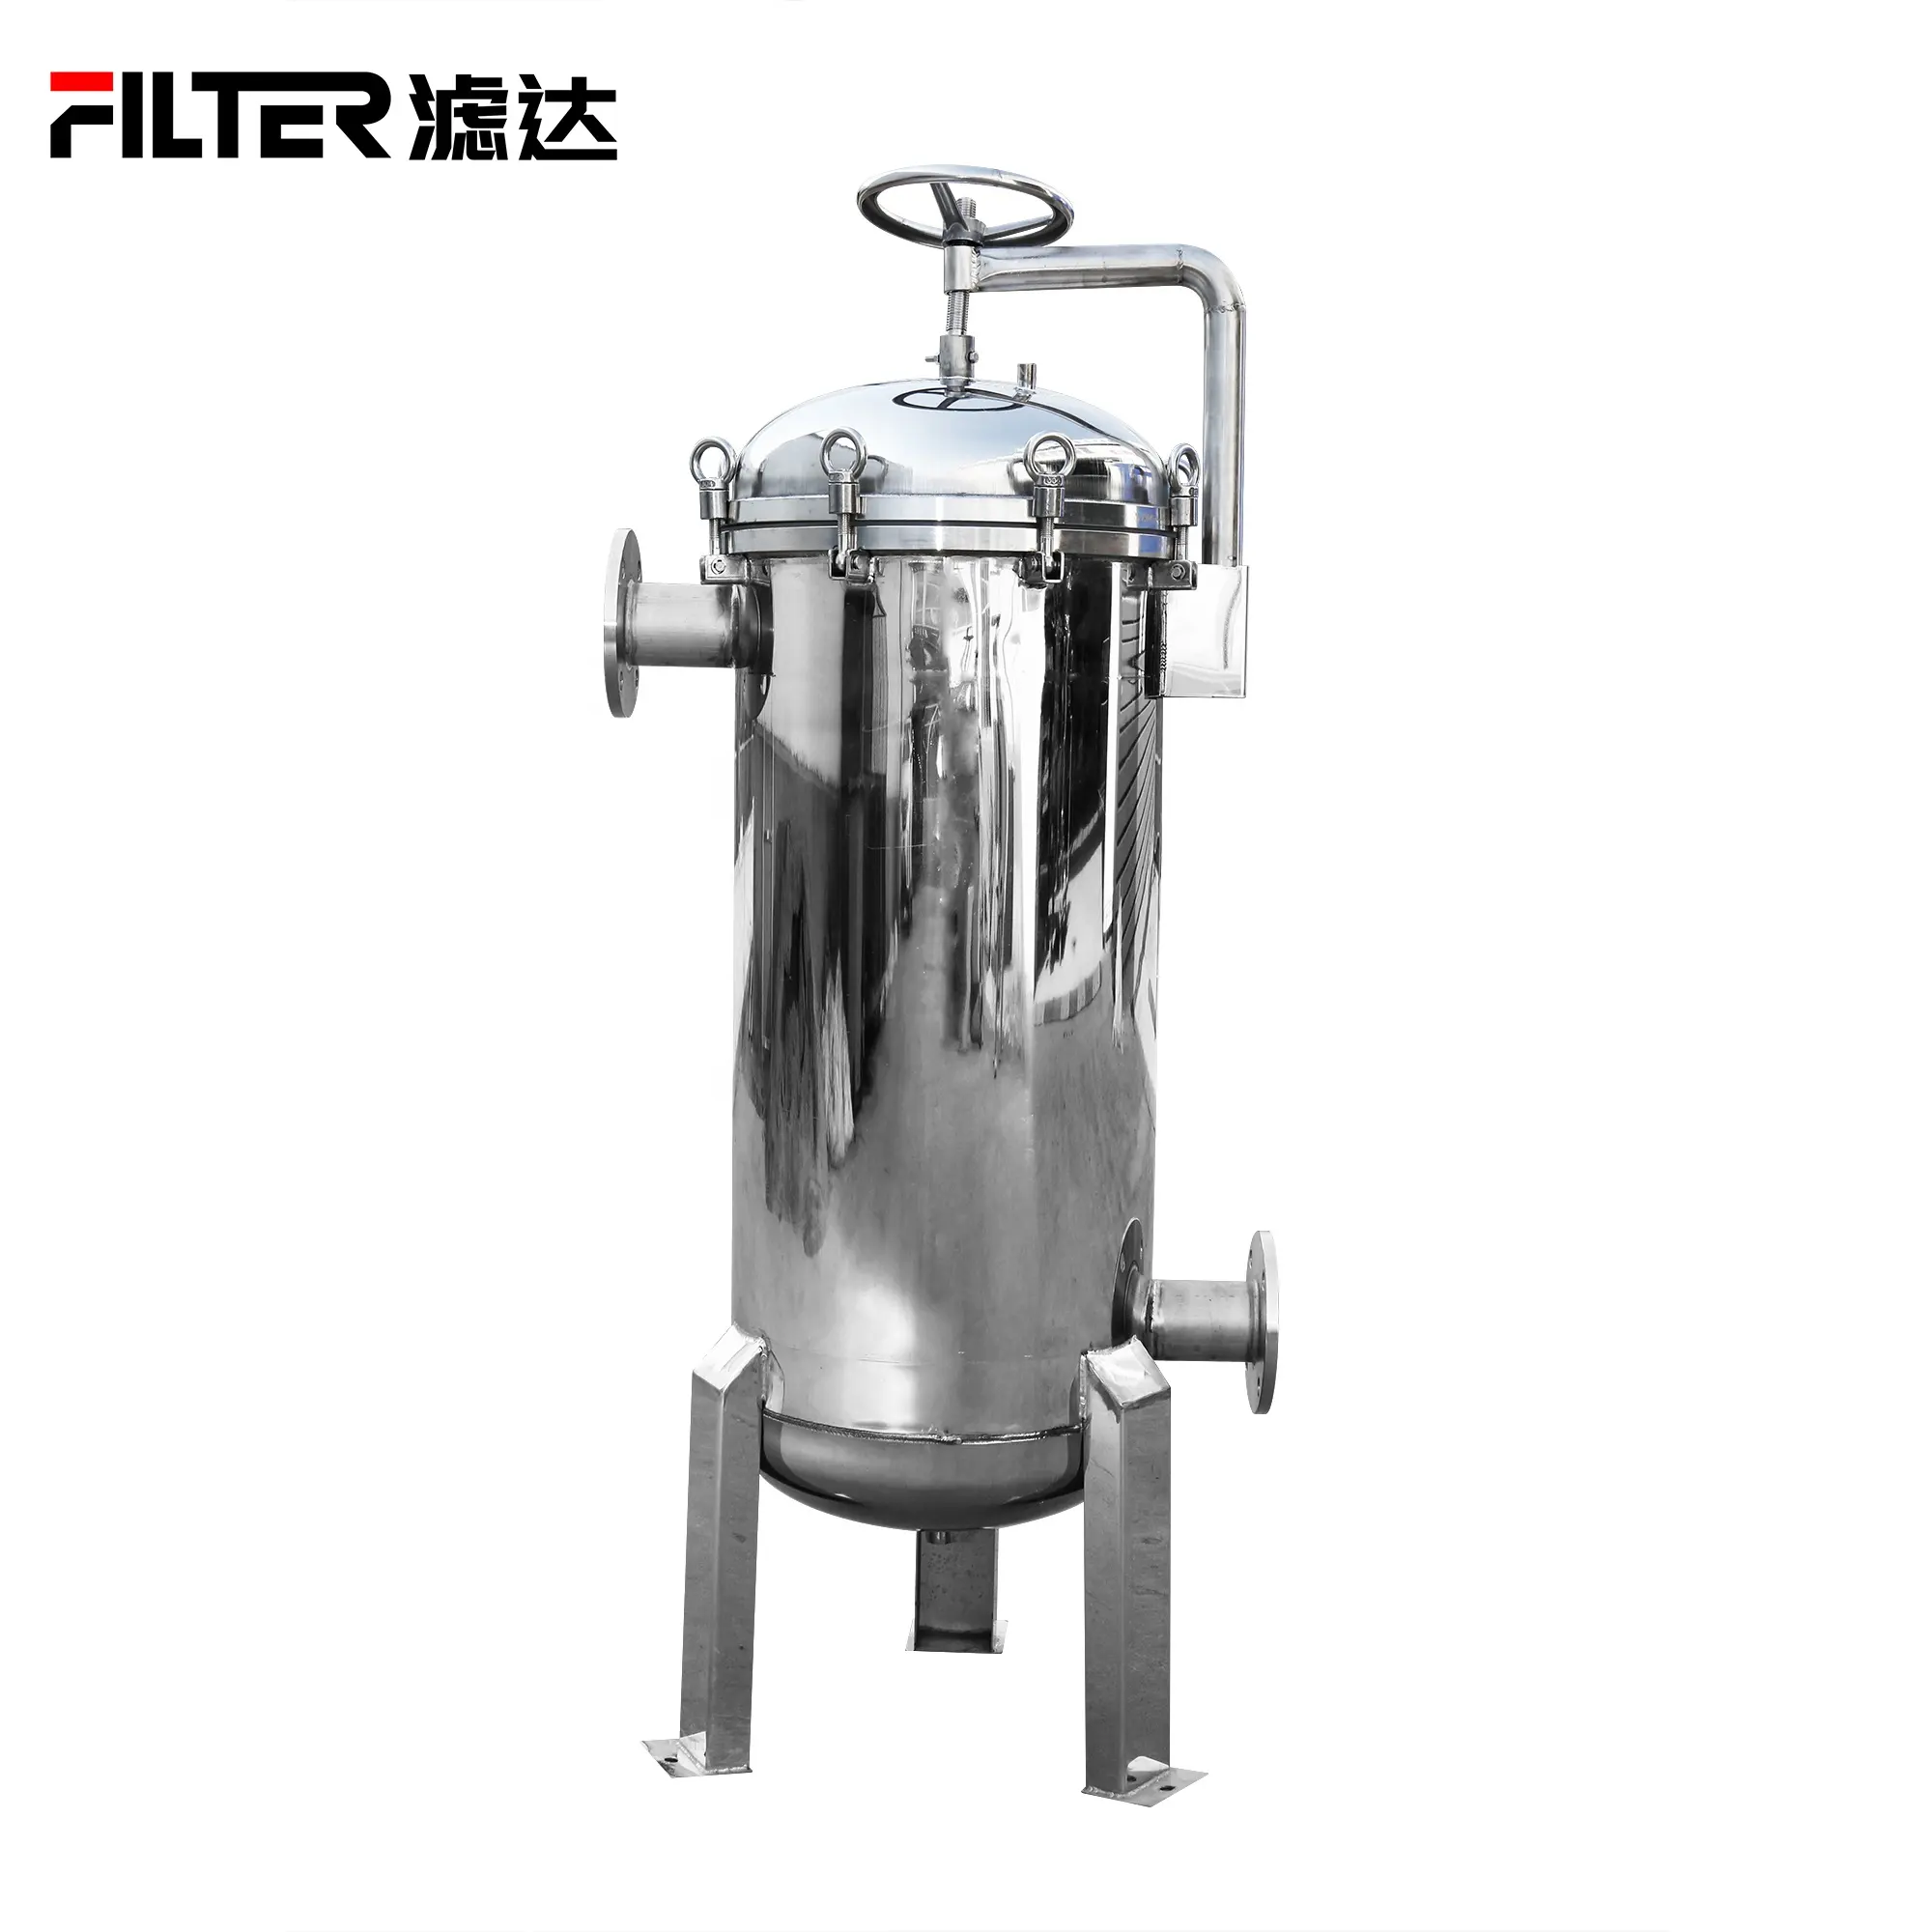 Solid-liquid separation stainless steel Microelectronics electroplating solution filtration equipment filter shell